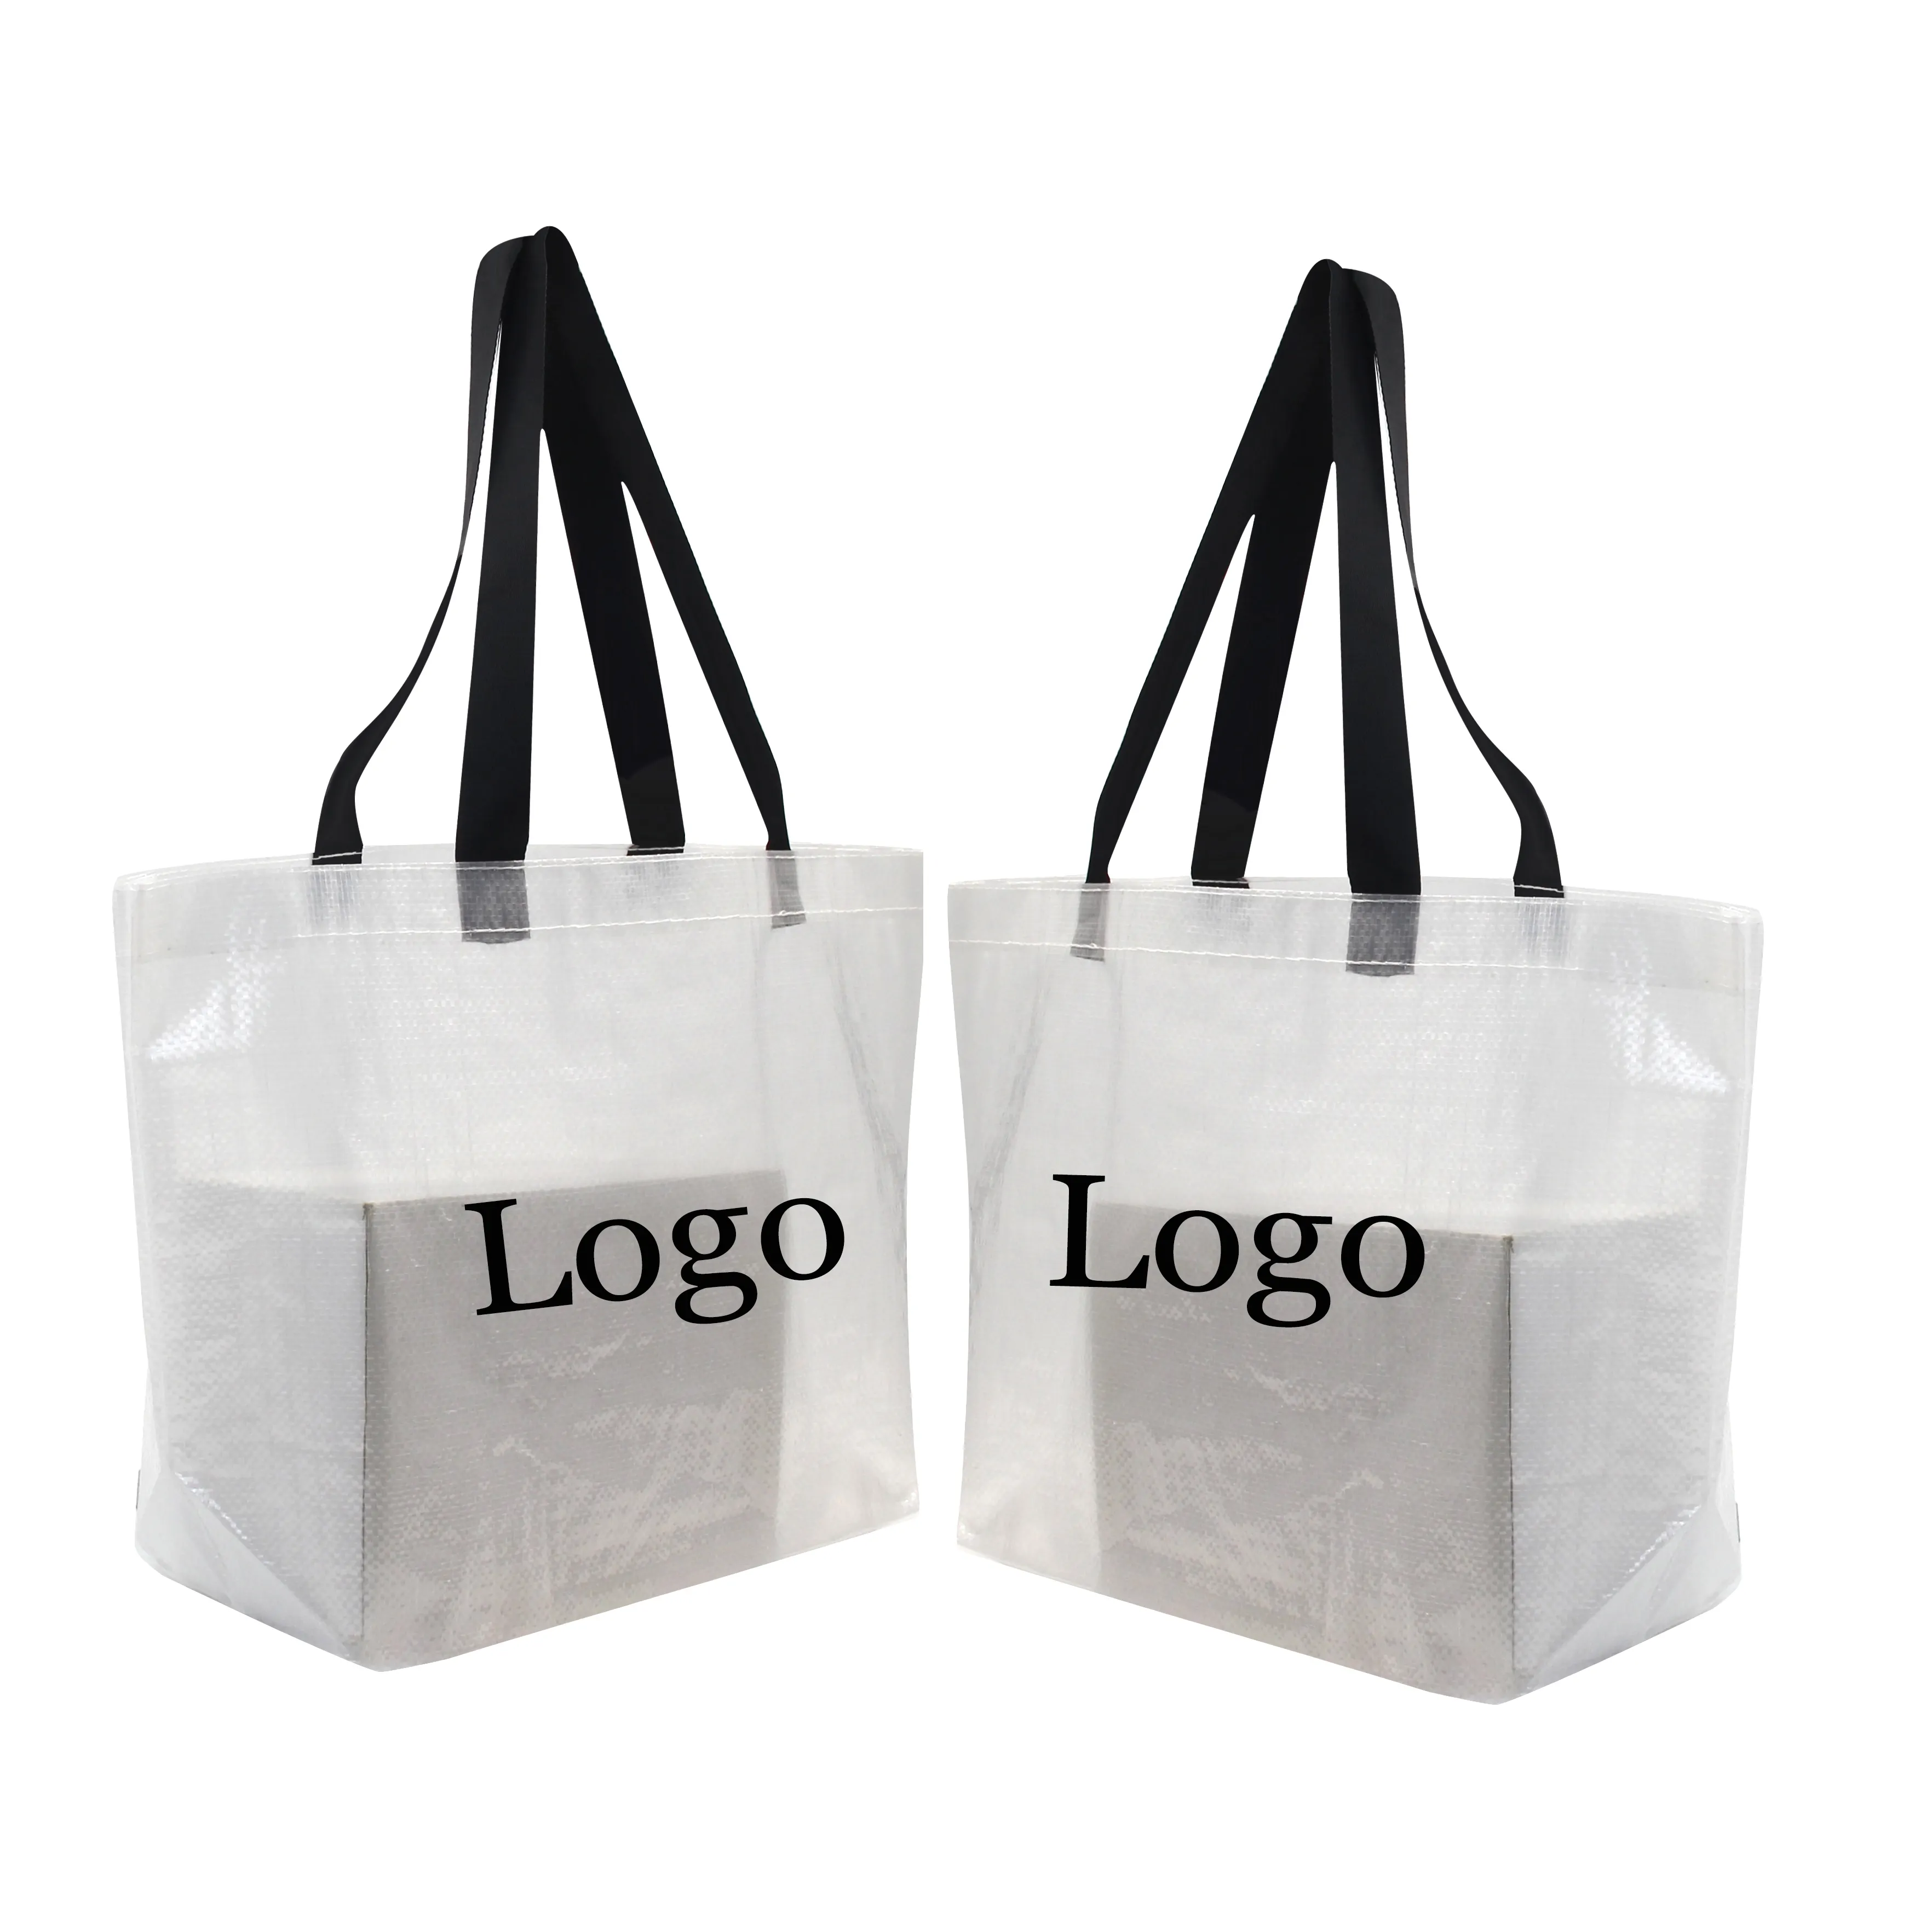 Wholesale Supermarket Pp Nonwoven Grocery Bag Waterproof Beach Gift Bag Transparent Woven Shopping Bag